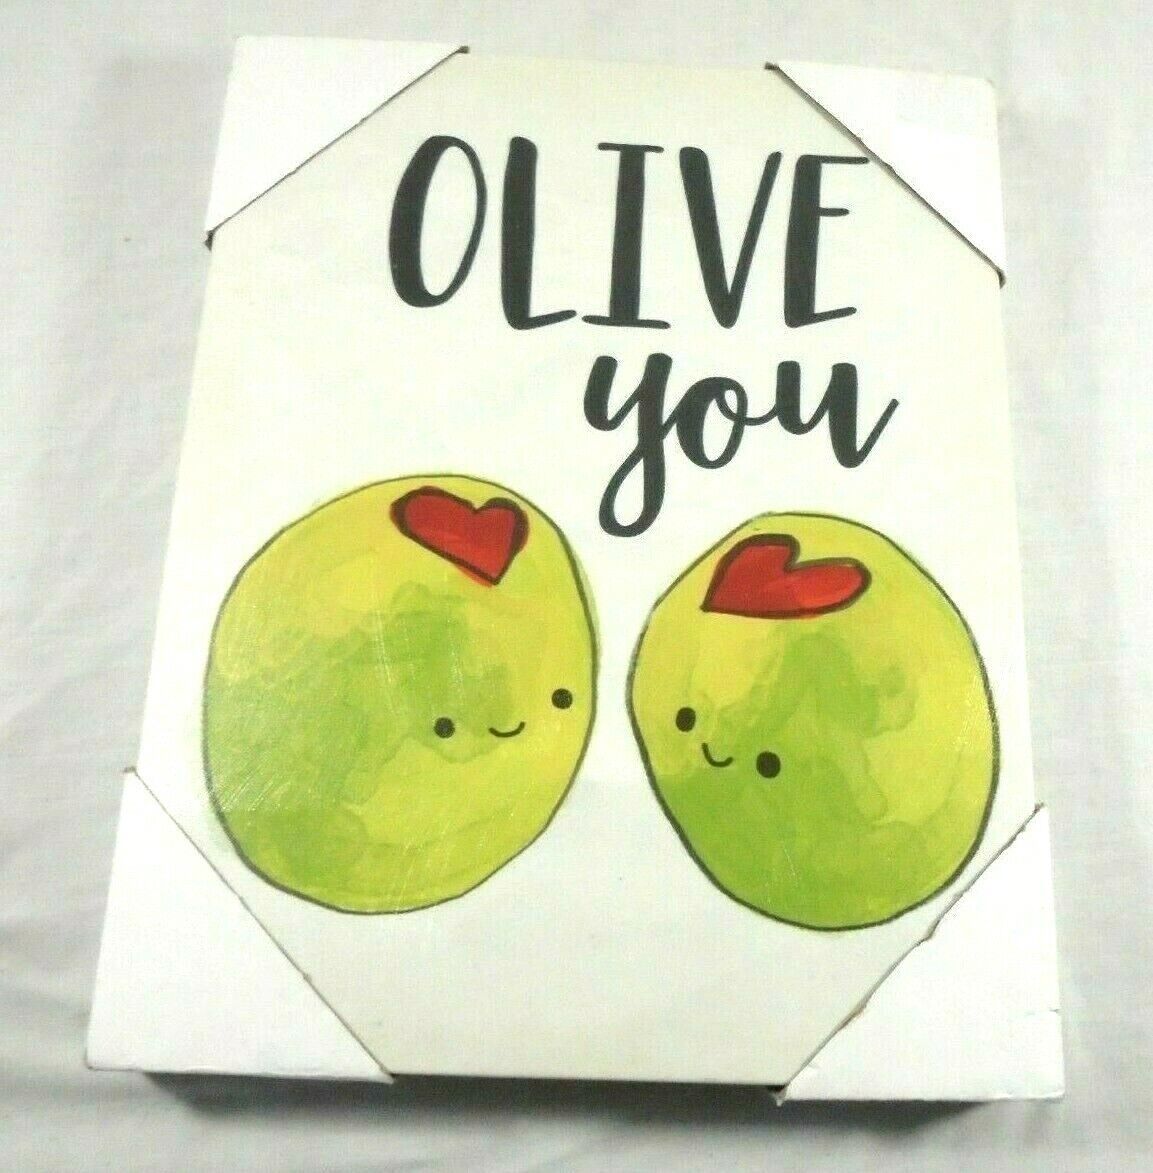 Designs Direct "Olive You" olives food romance love canvas print rectangle NEW - $13.35